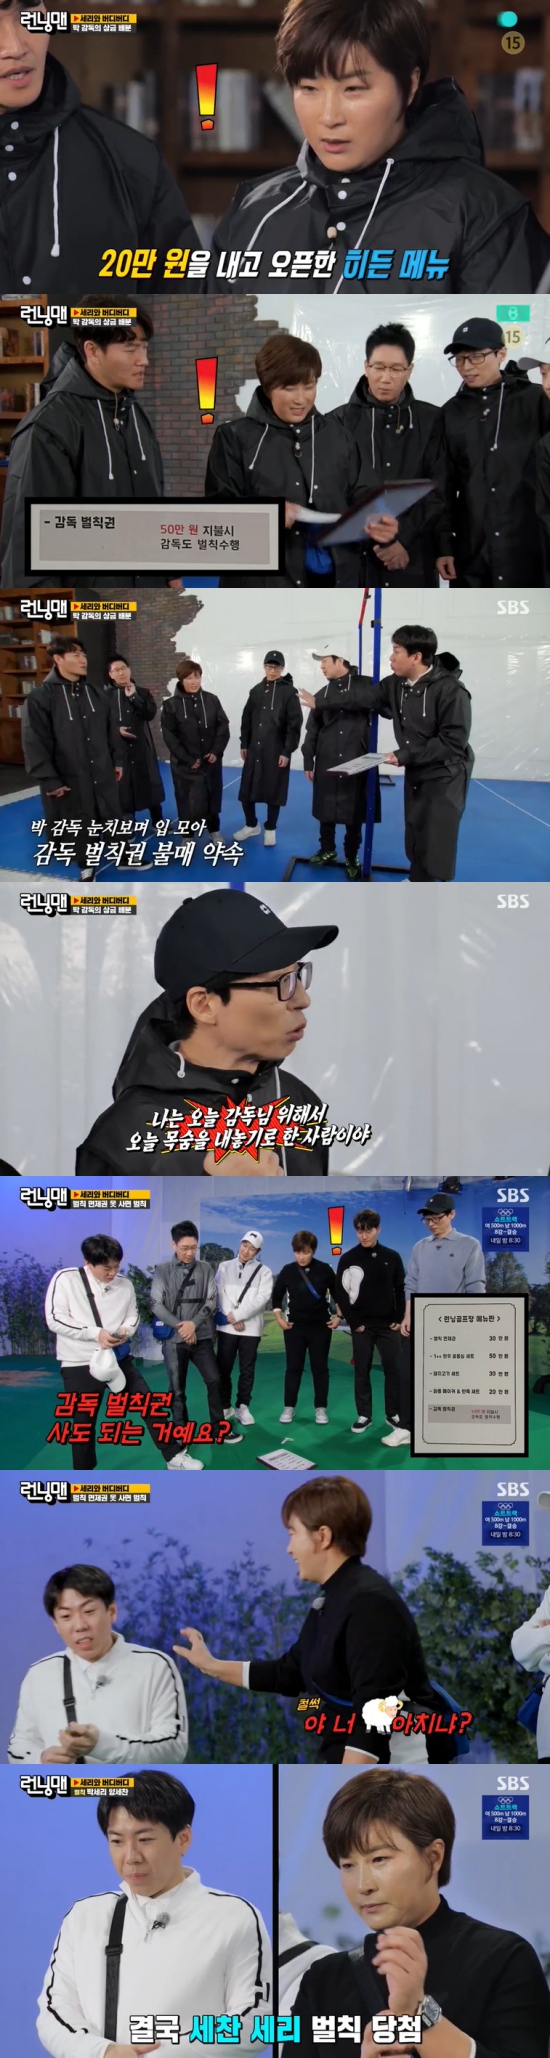 Golf manager Pak Se-ri has revealed his refusal to join the Running Man.On SBS Running Man broadcasted on the 6th, Serri and Birdie Buddy Race was decorated with a scene where Pak Se-ri appeared as a guest.I saw you during Happy Together, you came out before, because you came out of a tray karaoke room, Yoo Jae-Suk recalled of Pak Se-ri.Kim Jong-kook quivered, saying, When I look really similar to me, and Yoo Jae-Suk said, It looks like a two-shot.I do not get tired of hearing so much of this story. Pak Se-ri said, I have been contacted about Running Man.Kim Jong-kook talked about his appearance in a resemblance to his story and said, I said, I did it.Pak Se-ri said: So it was a long way from Running Man.My nephew said, I like Running Man so much. Yoo Jae-Suk joked, Why do you like it because there is a person like your aunt?The production team then started Serri and Birdie Buddy Race, and (Pak Se-ri) has to head the five Running Man as an entertainment director today and turn around the 18th hole of the mission.Five members of Running Man are eligible for penalties, and they can receive a penalty exemption only if they purchase a penalty exemption at the end. The production team said, The prize money for purchasing the penalty exemption is a team of six people for each mission, and accordingly the prize money will be given, and the penalty exemption and the winning product can be purchased with the prize money.All the prize money will be paid to Serri, and the bishop can proceed with his judgment from the operation to the distribution of the prize money. Various missions were held, which consisted of pre-mission Putting and 18 holes from 1 hole.In the process, Pak Se-ri allocated the prize money according to the contribution of the members.The members also wondered what Hidden menu they could check by paying 200,000 won on the menu.The members encouraged Pak Se-ri to check out the Hidden menu, and eventually Pak Se-ri paid 200,000 won.However, the Hidden menu was a penalty for the director, and Pak Se-ri said, If I get caught, I will not make PD. (A pardon for the directors penalty) slaps you, Im the one who decided to put his life out for the coach today, Yoo Jae-Suk said.In particular, Pak Se-ri generously handed out the remaining prize money to the members after all the missions were over.Haha purchased a penalty waiver and a set of pork, while Yoo Jae-Suk, Ji Seok-jin and Kim Jong-kook each purchased a penalty waiver.At this time, Yang Se-chan said he would buy the directors penalty, and Pak Se-ri said, Are you a bitch?Yang Se-chan firmly bought the managerial penalty, and eventually Pak Se-ri and Yang Se-chan won the penalty.The production team released the penalty, and said, The penalty is that I do not want to make (set) so I can go around one more hole.Photo = SBS broadcast screen